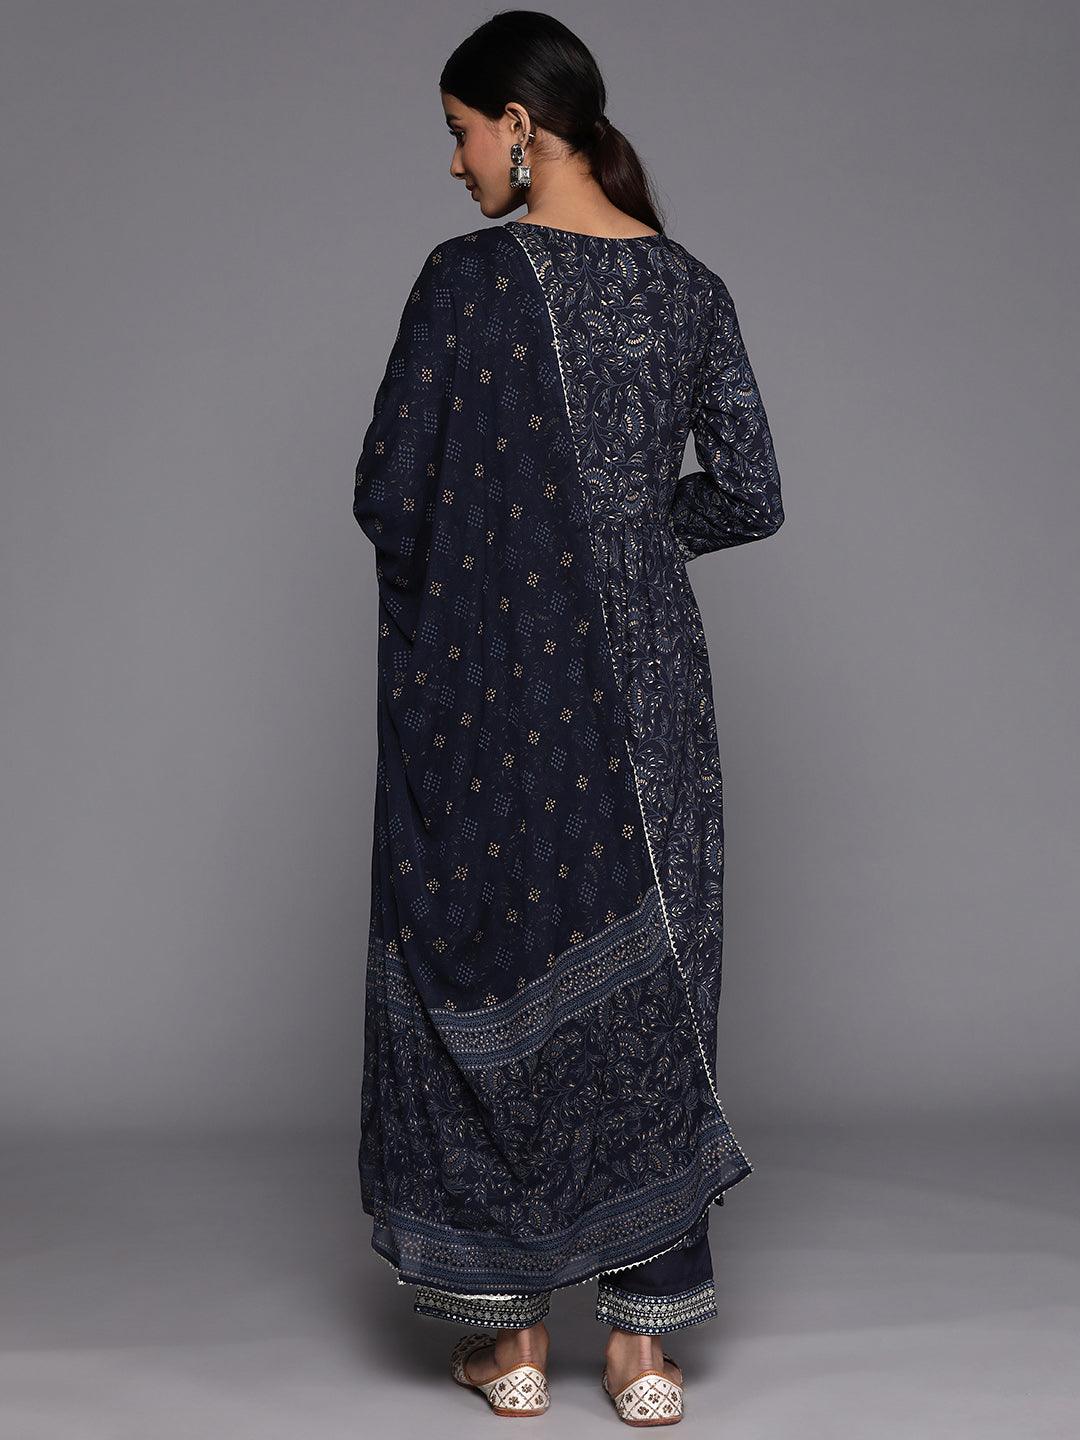 Navy Blue Yoke Design Rayon A-Line Suit Set With Trousers - Libas